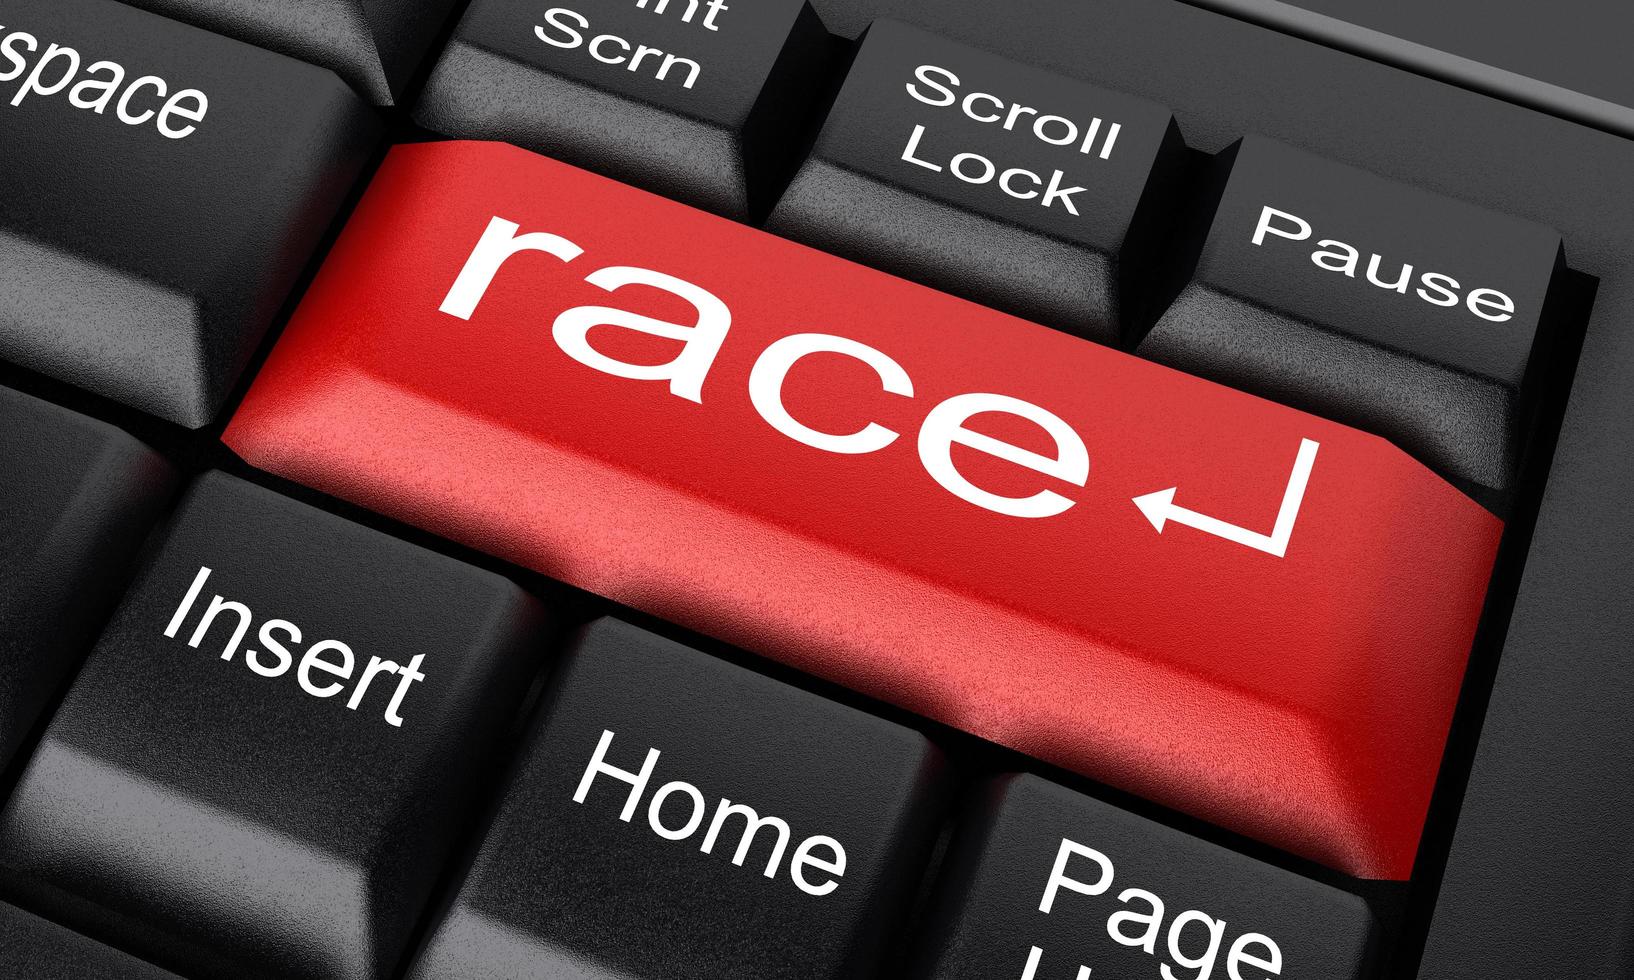 race word on red keyboard button photo